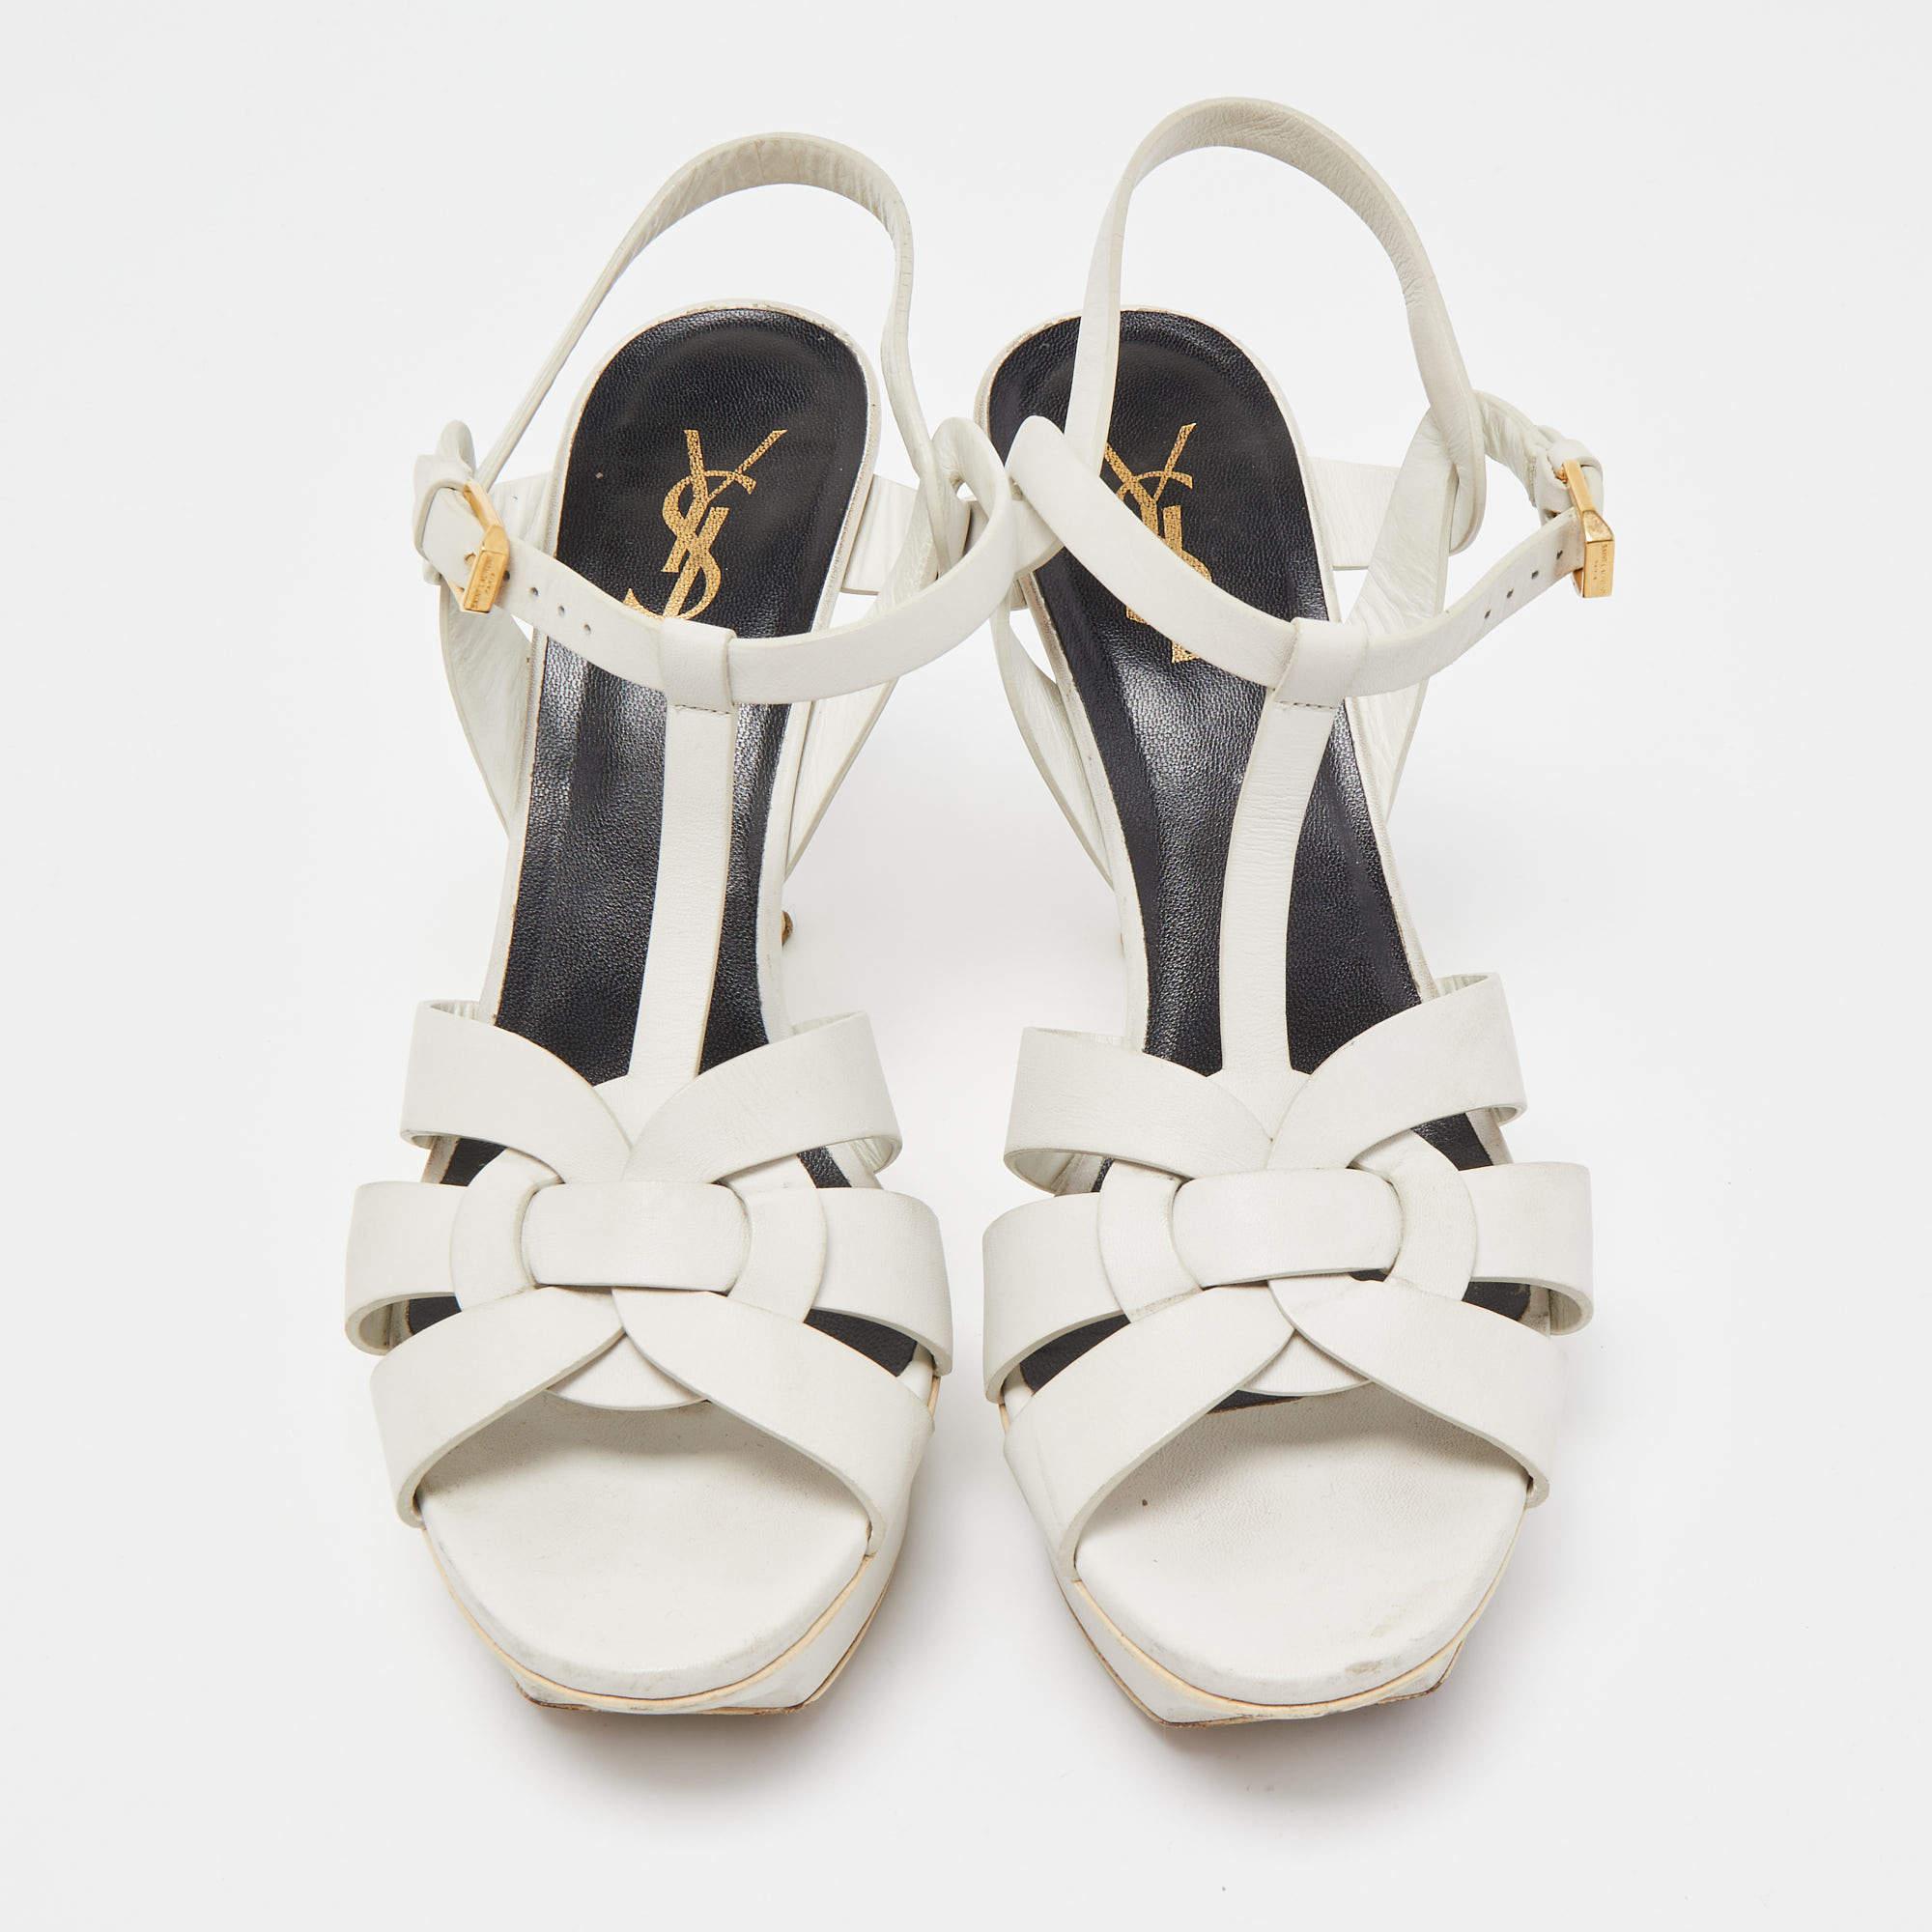 The fashionista in you will instantly fall in love with these Saint Laurent Tribute sandals! They are made from white leather with intertwined straps on the vamps and ankle buckle closure. The gold-tone hardware, 12cm heels, and platforms give it a